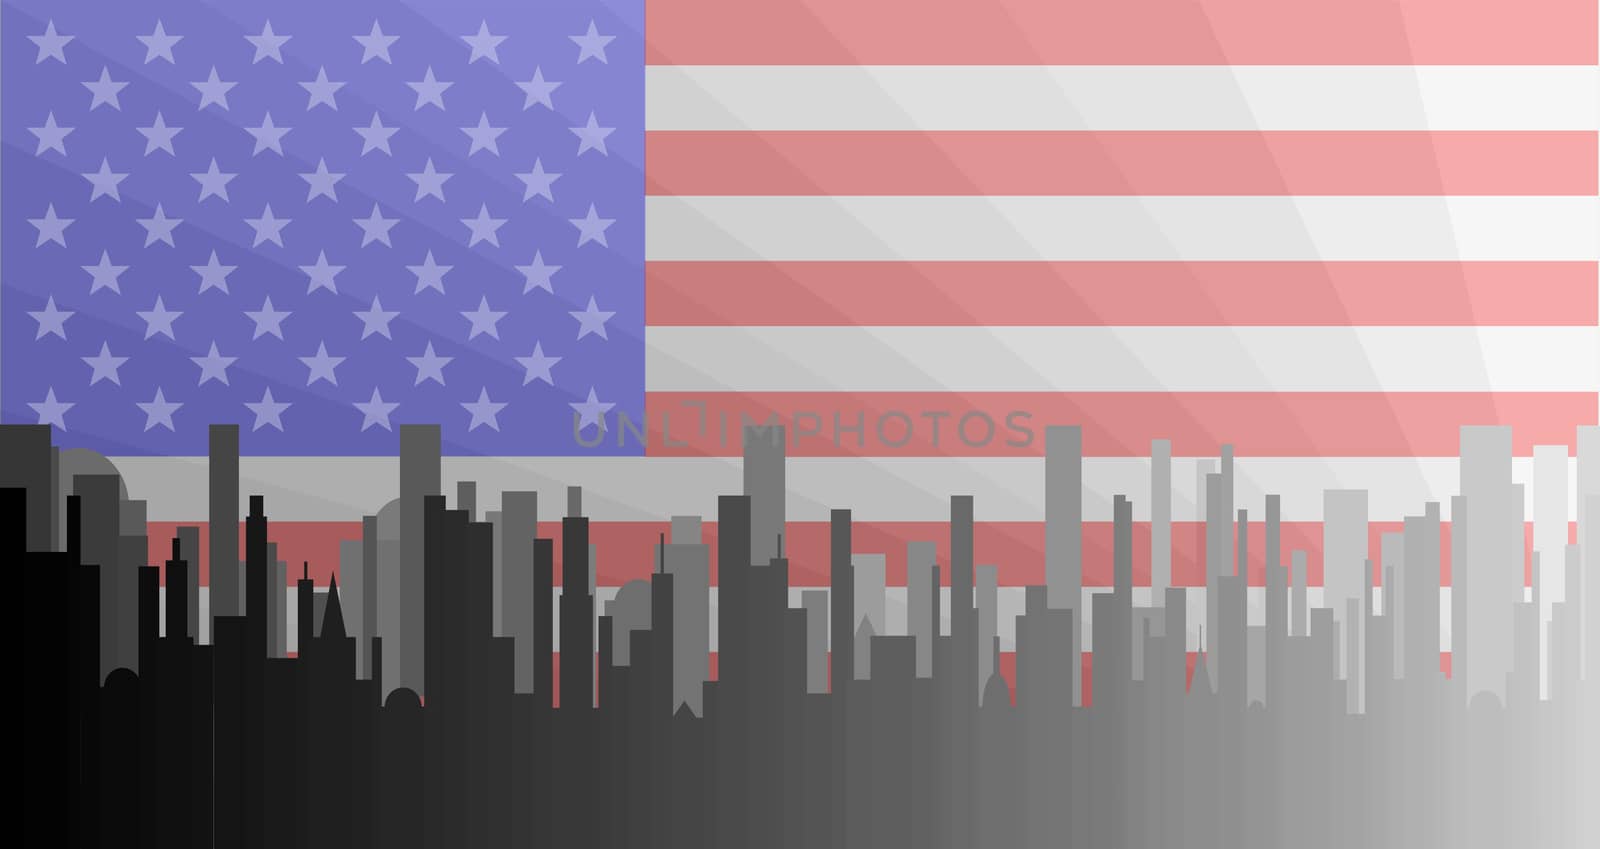 A grey cityscape shown in grey and silhouette with the Stars and Stripes underlay